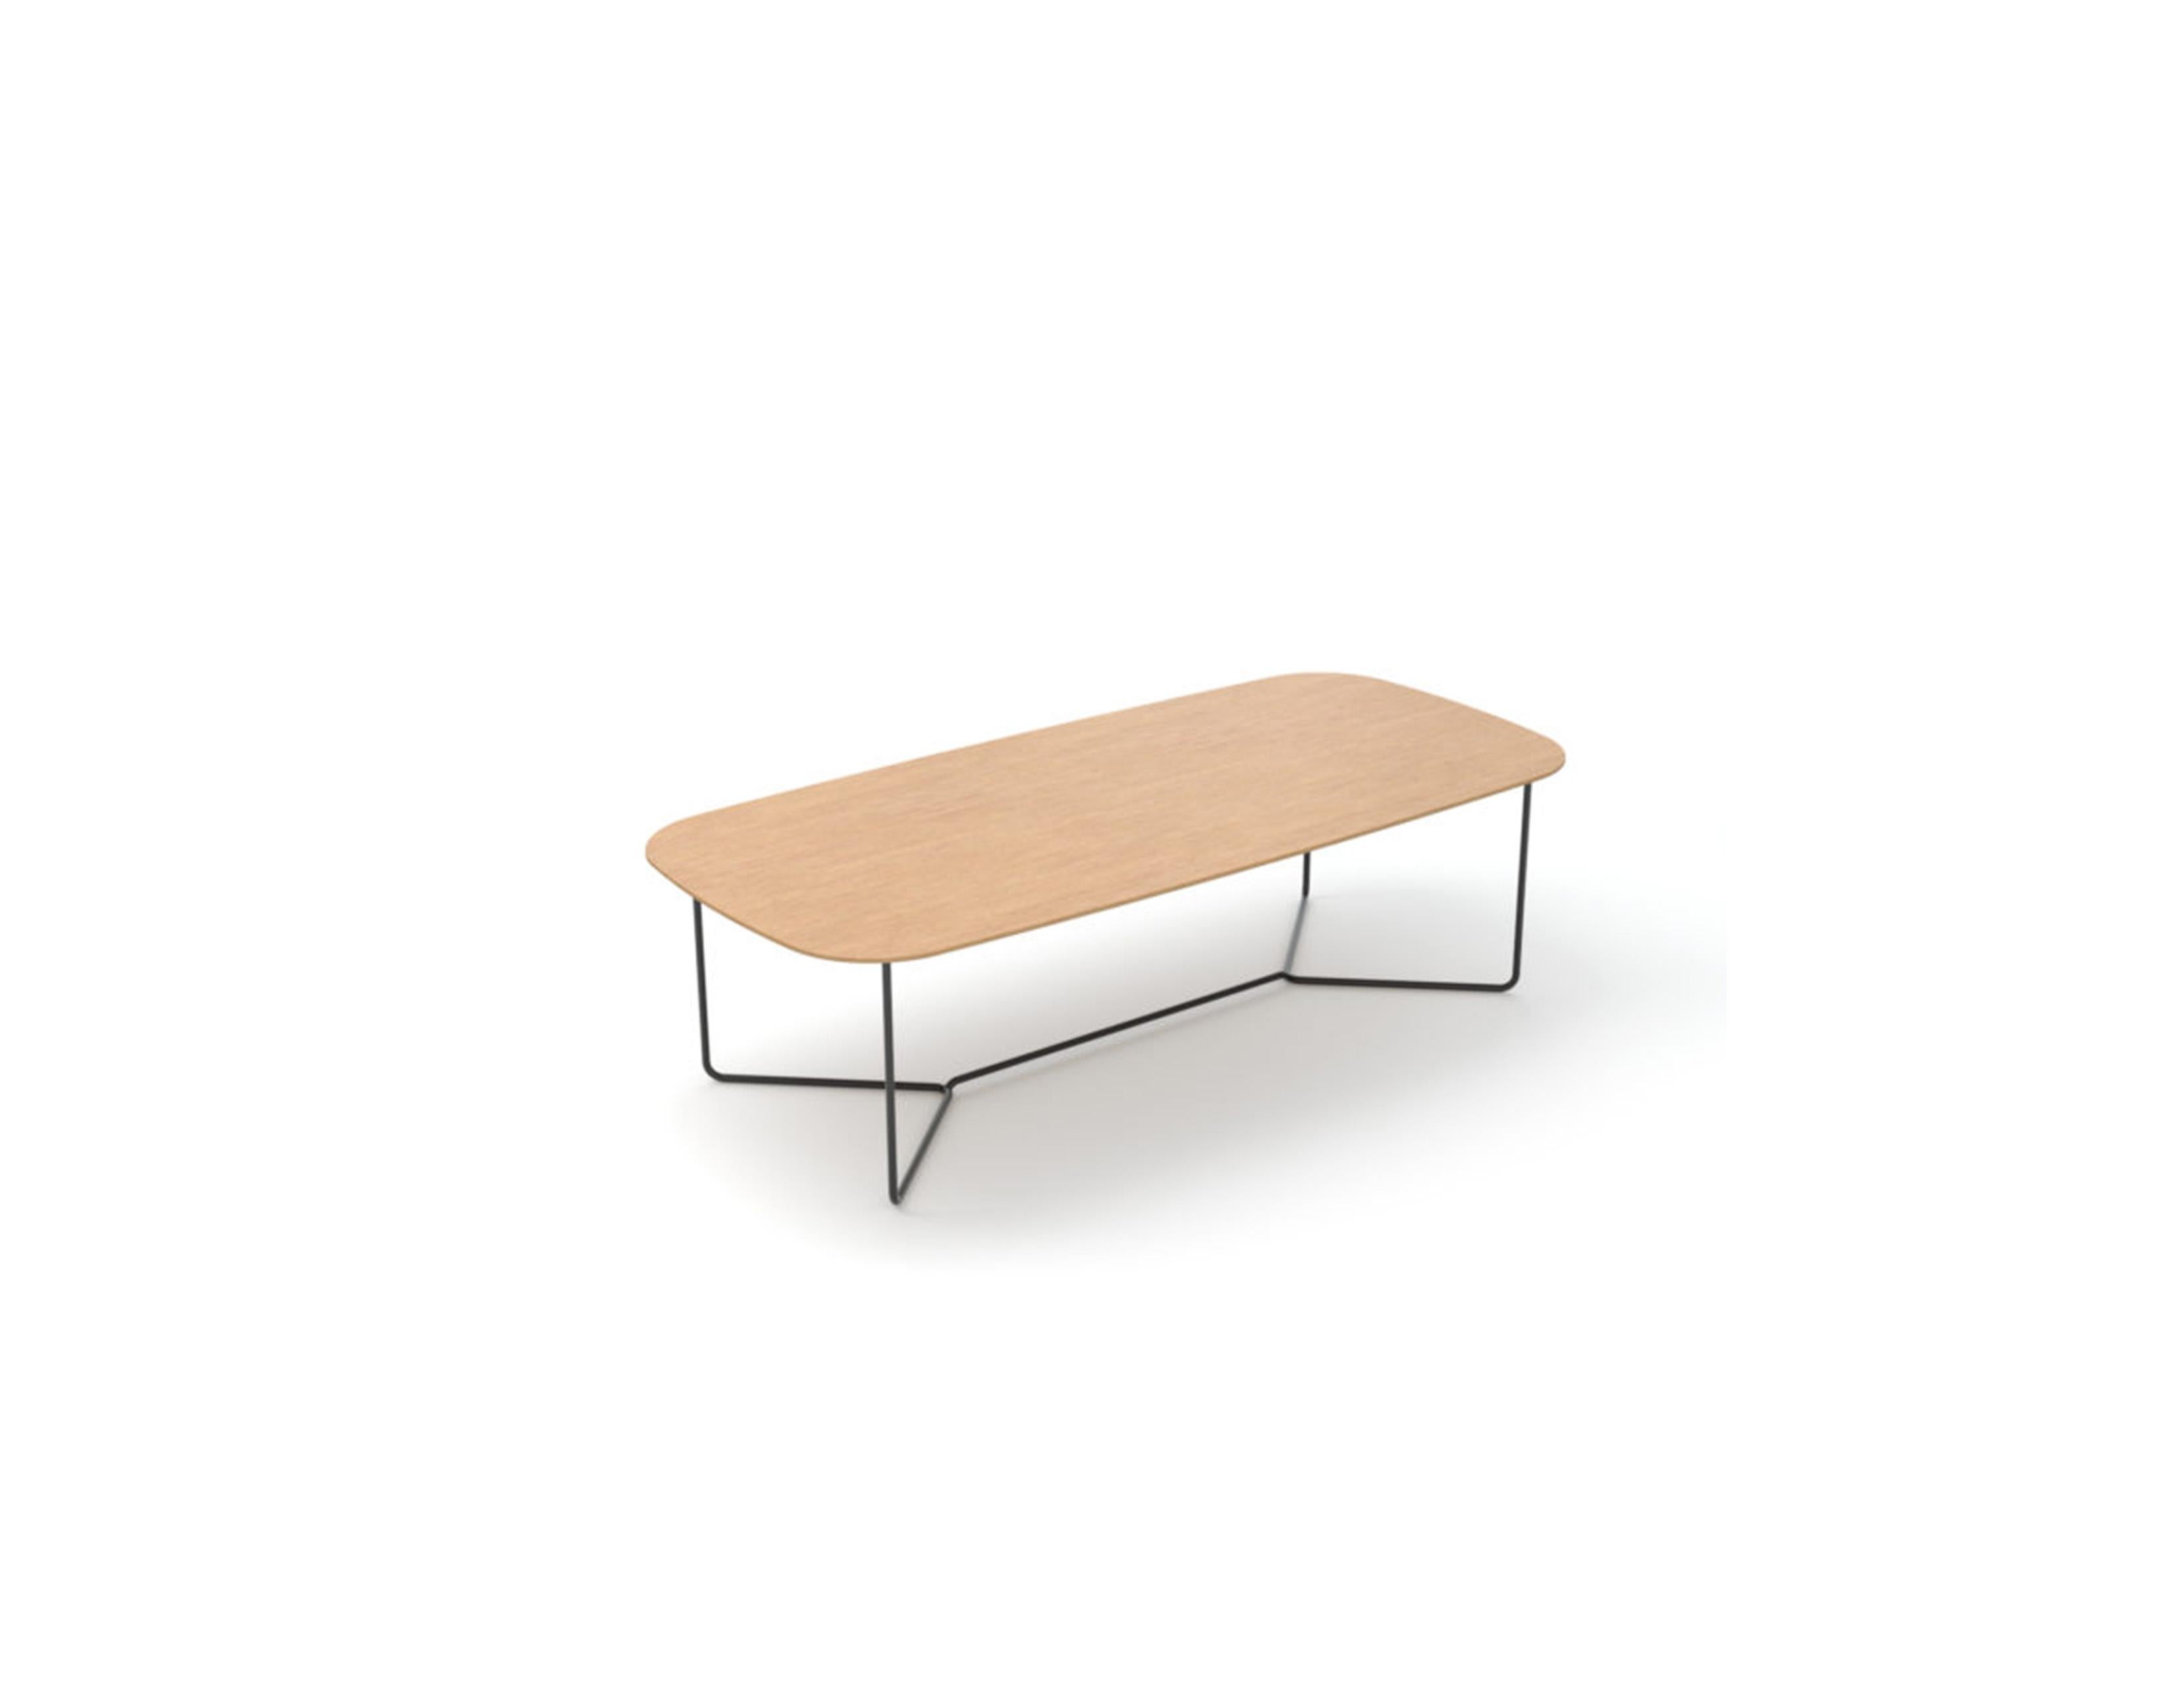 Bondo Wood is a family of casual, friendly and lightweight occasional tables designed to be paired with sofas and lounge chairs. The tables are in different shapes and heights that overlap each other allowing the creation of playful and organic